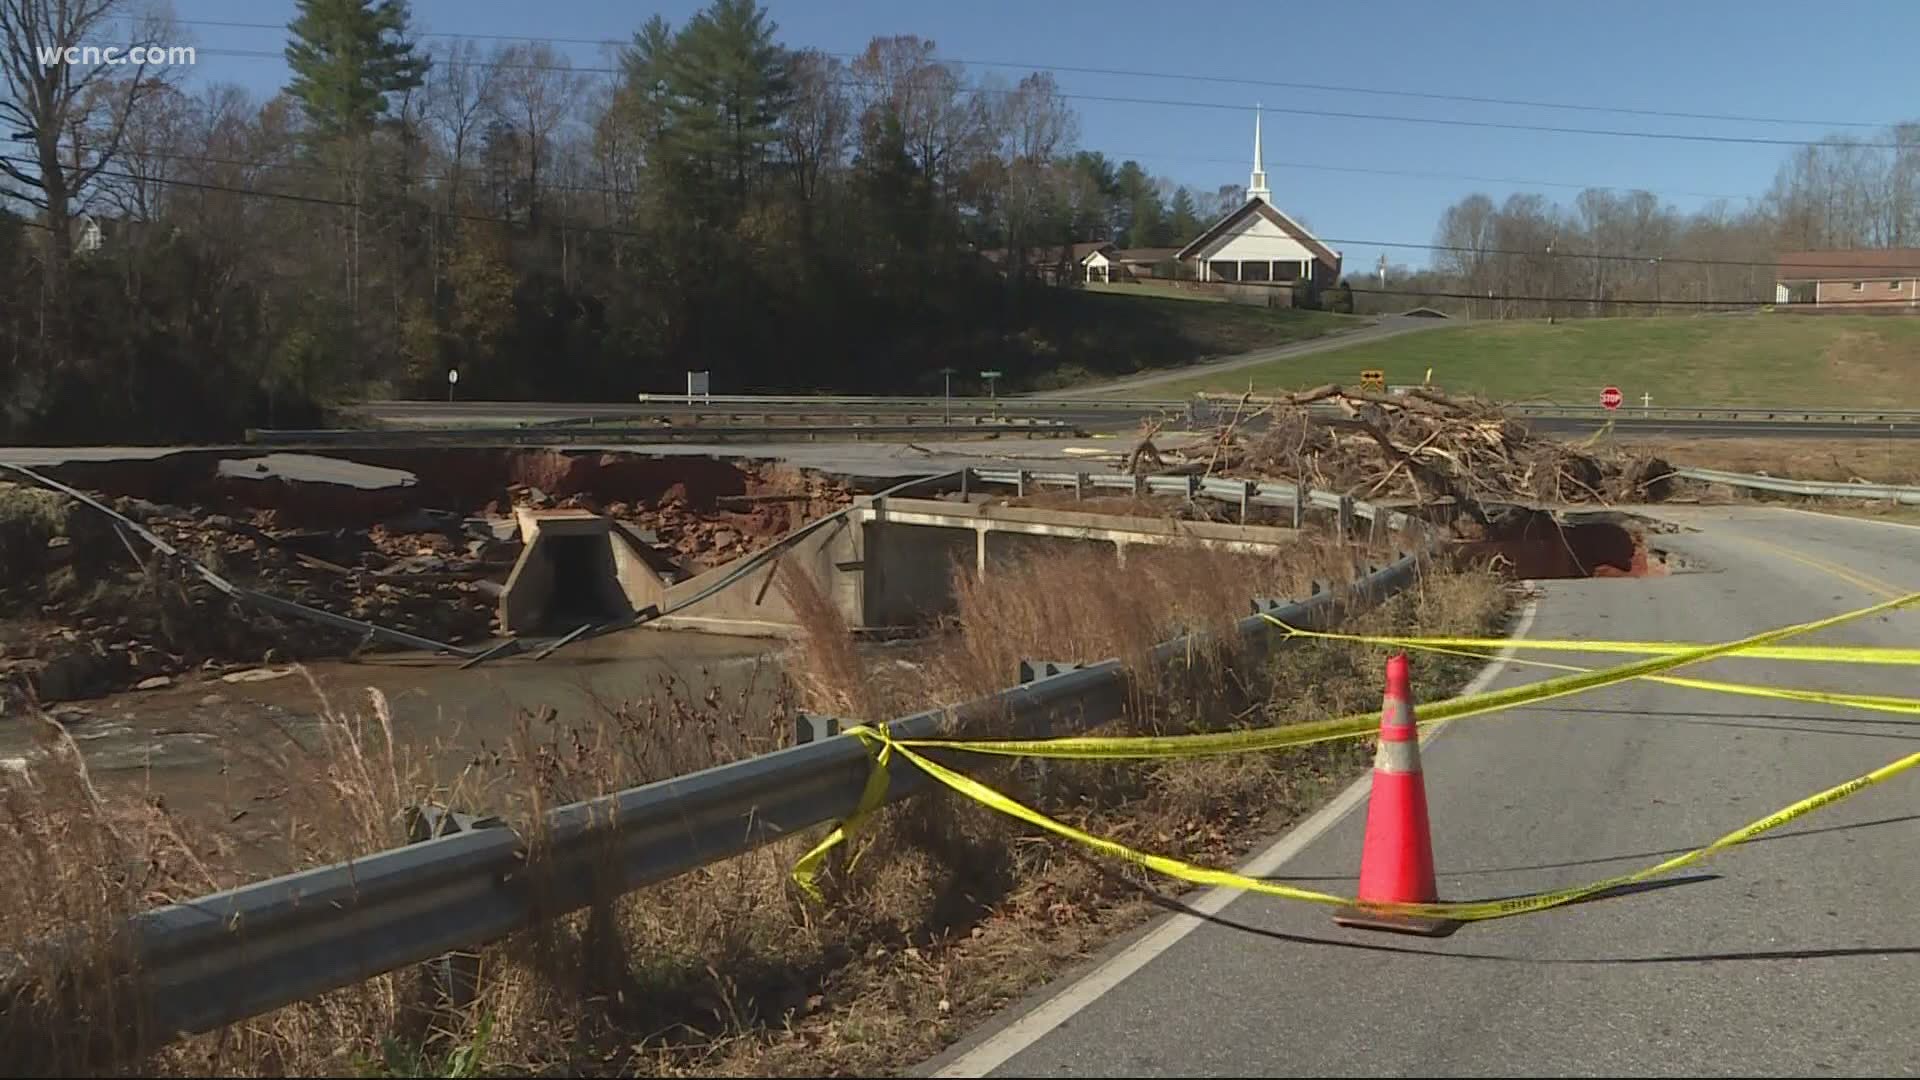 NCDOT is still working to access all damages.